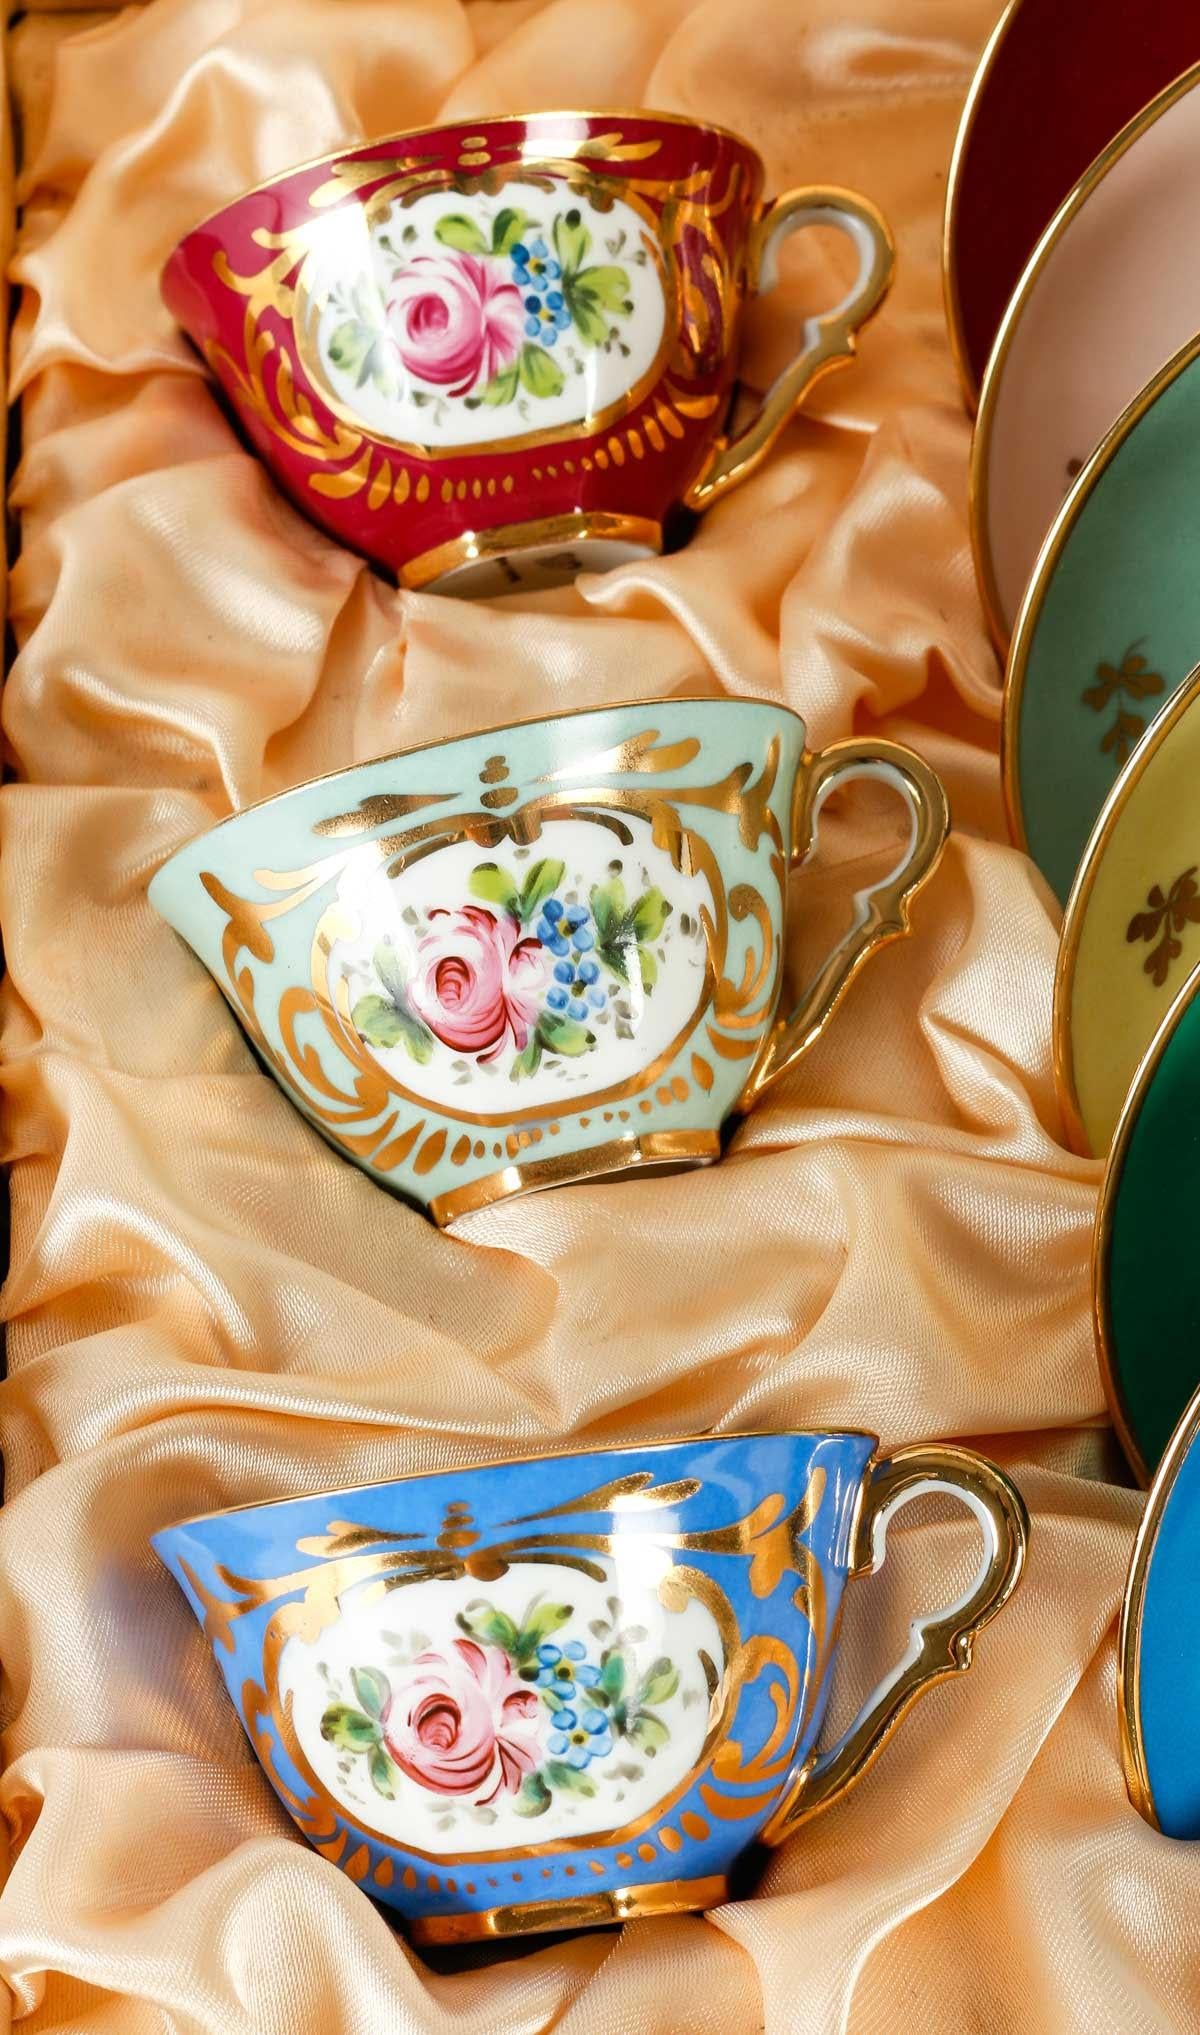 Limoges Porcelain Coffee Service, Early 20th .

Limoges porcelain coffee service in its box, early 20th century, Napoleon III style.

Dimensions: Box: h: 12cm, w: 35cm, d: 34cm